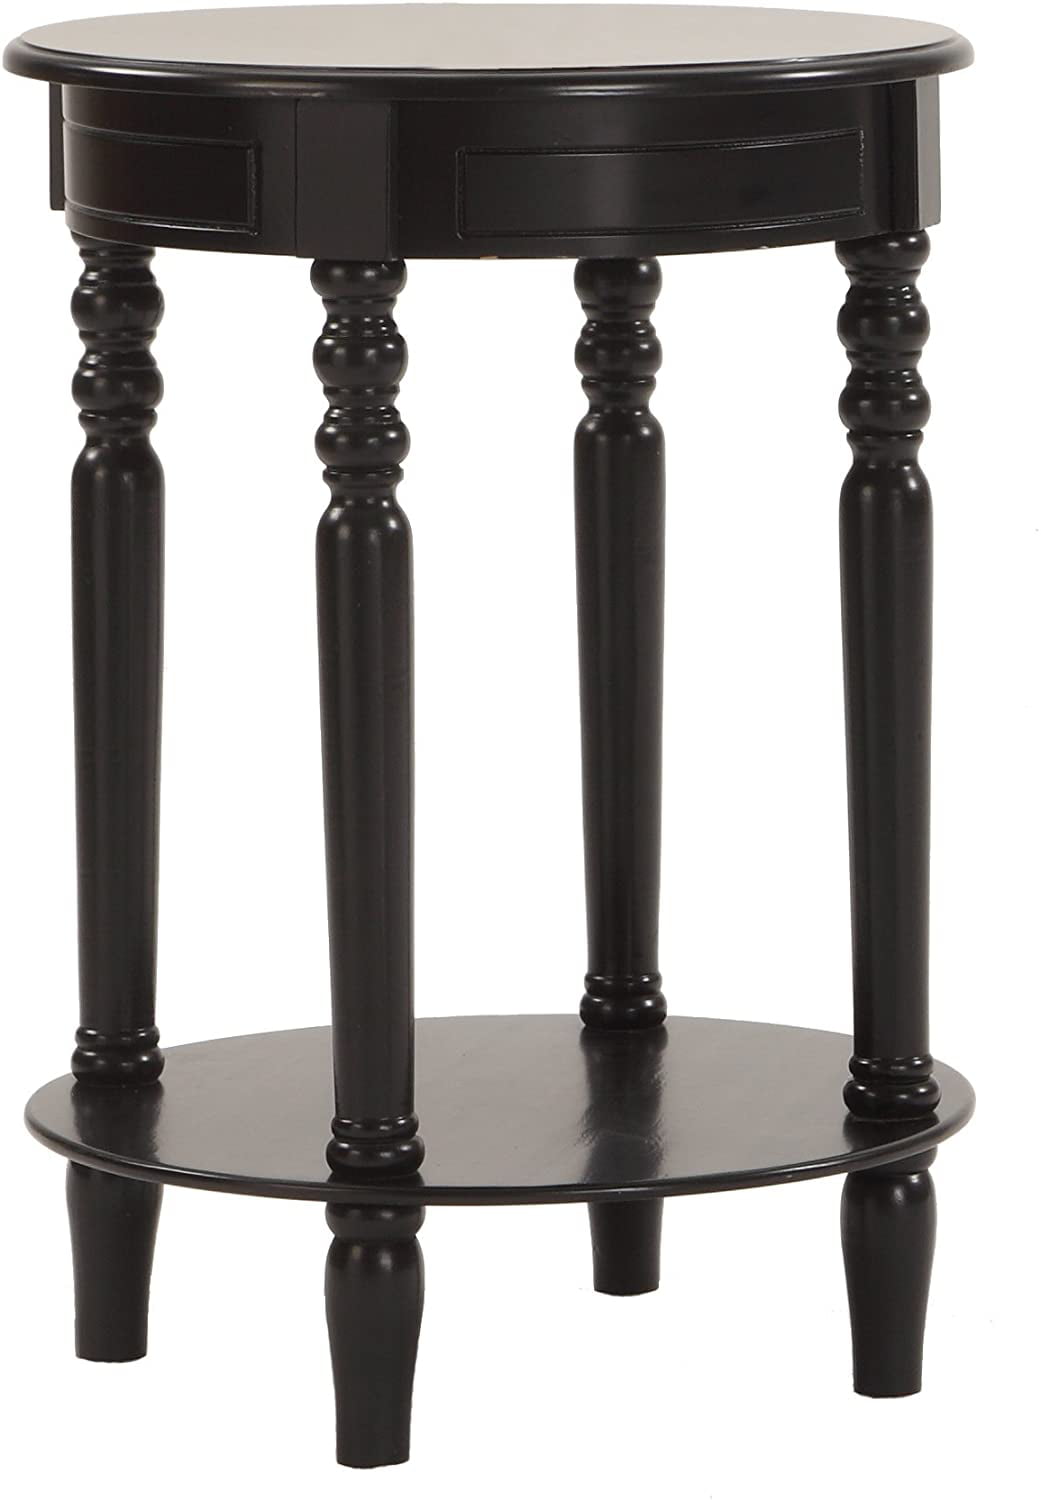 Crown Mark Laurel Chairside Table, This versatile accent side table adds function to a variety of decorating styles. Turned legs and carved sides add design.., By Brand Crown Mark